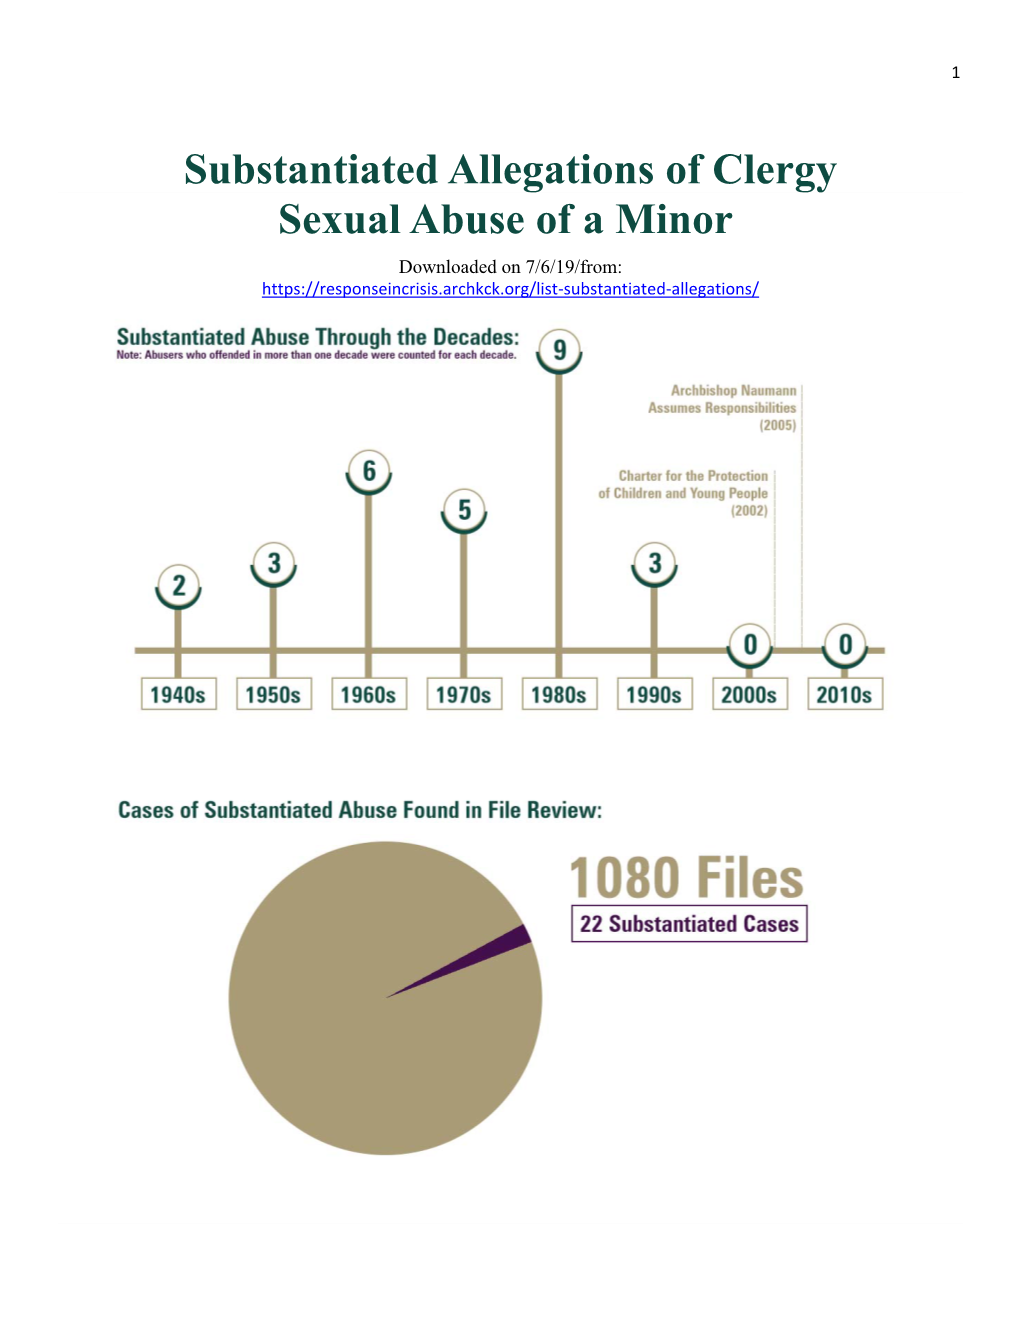 Substantiated Allegations of Clergy Sexual Abuse of a Minor Downloaded on 7/6/19/From